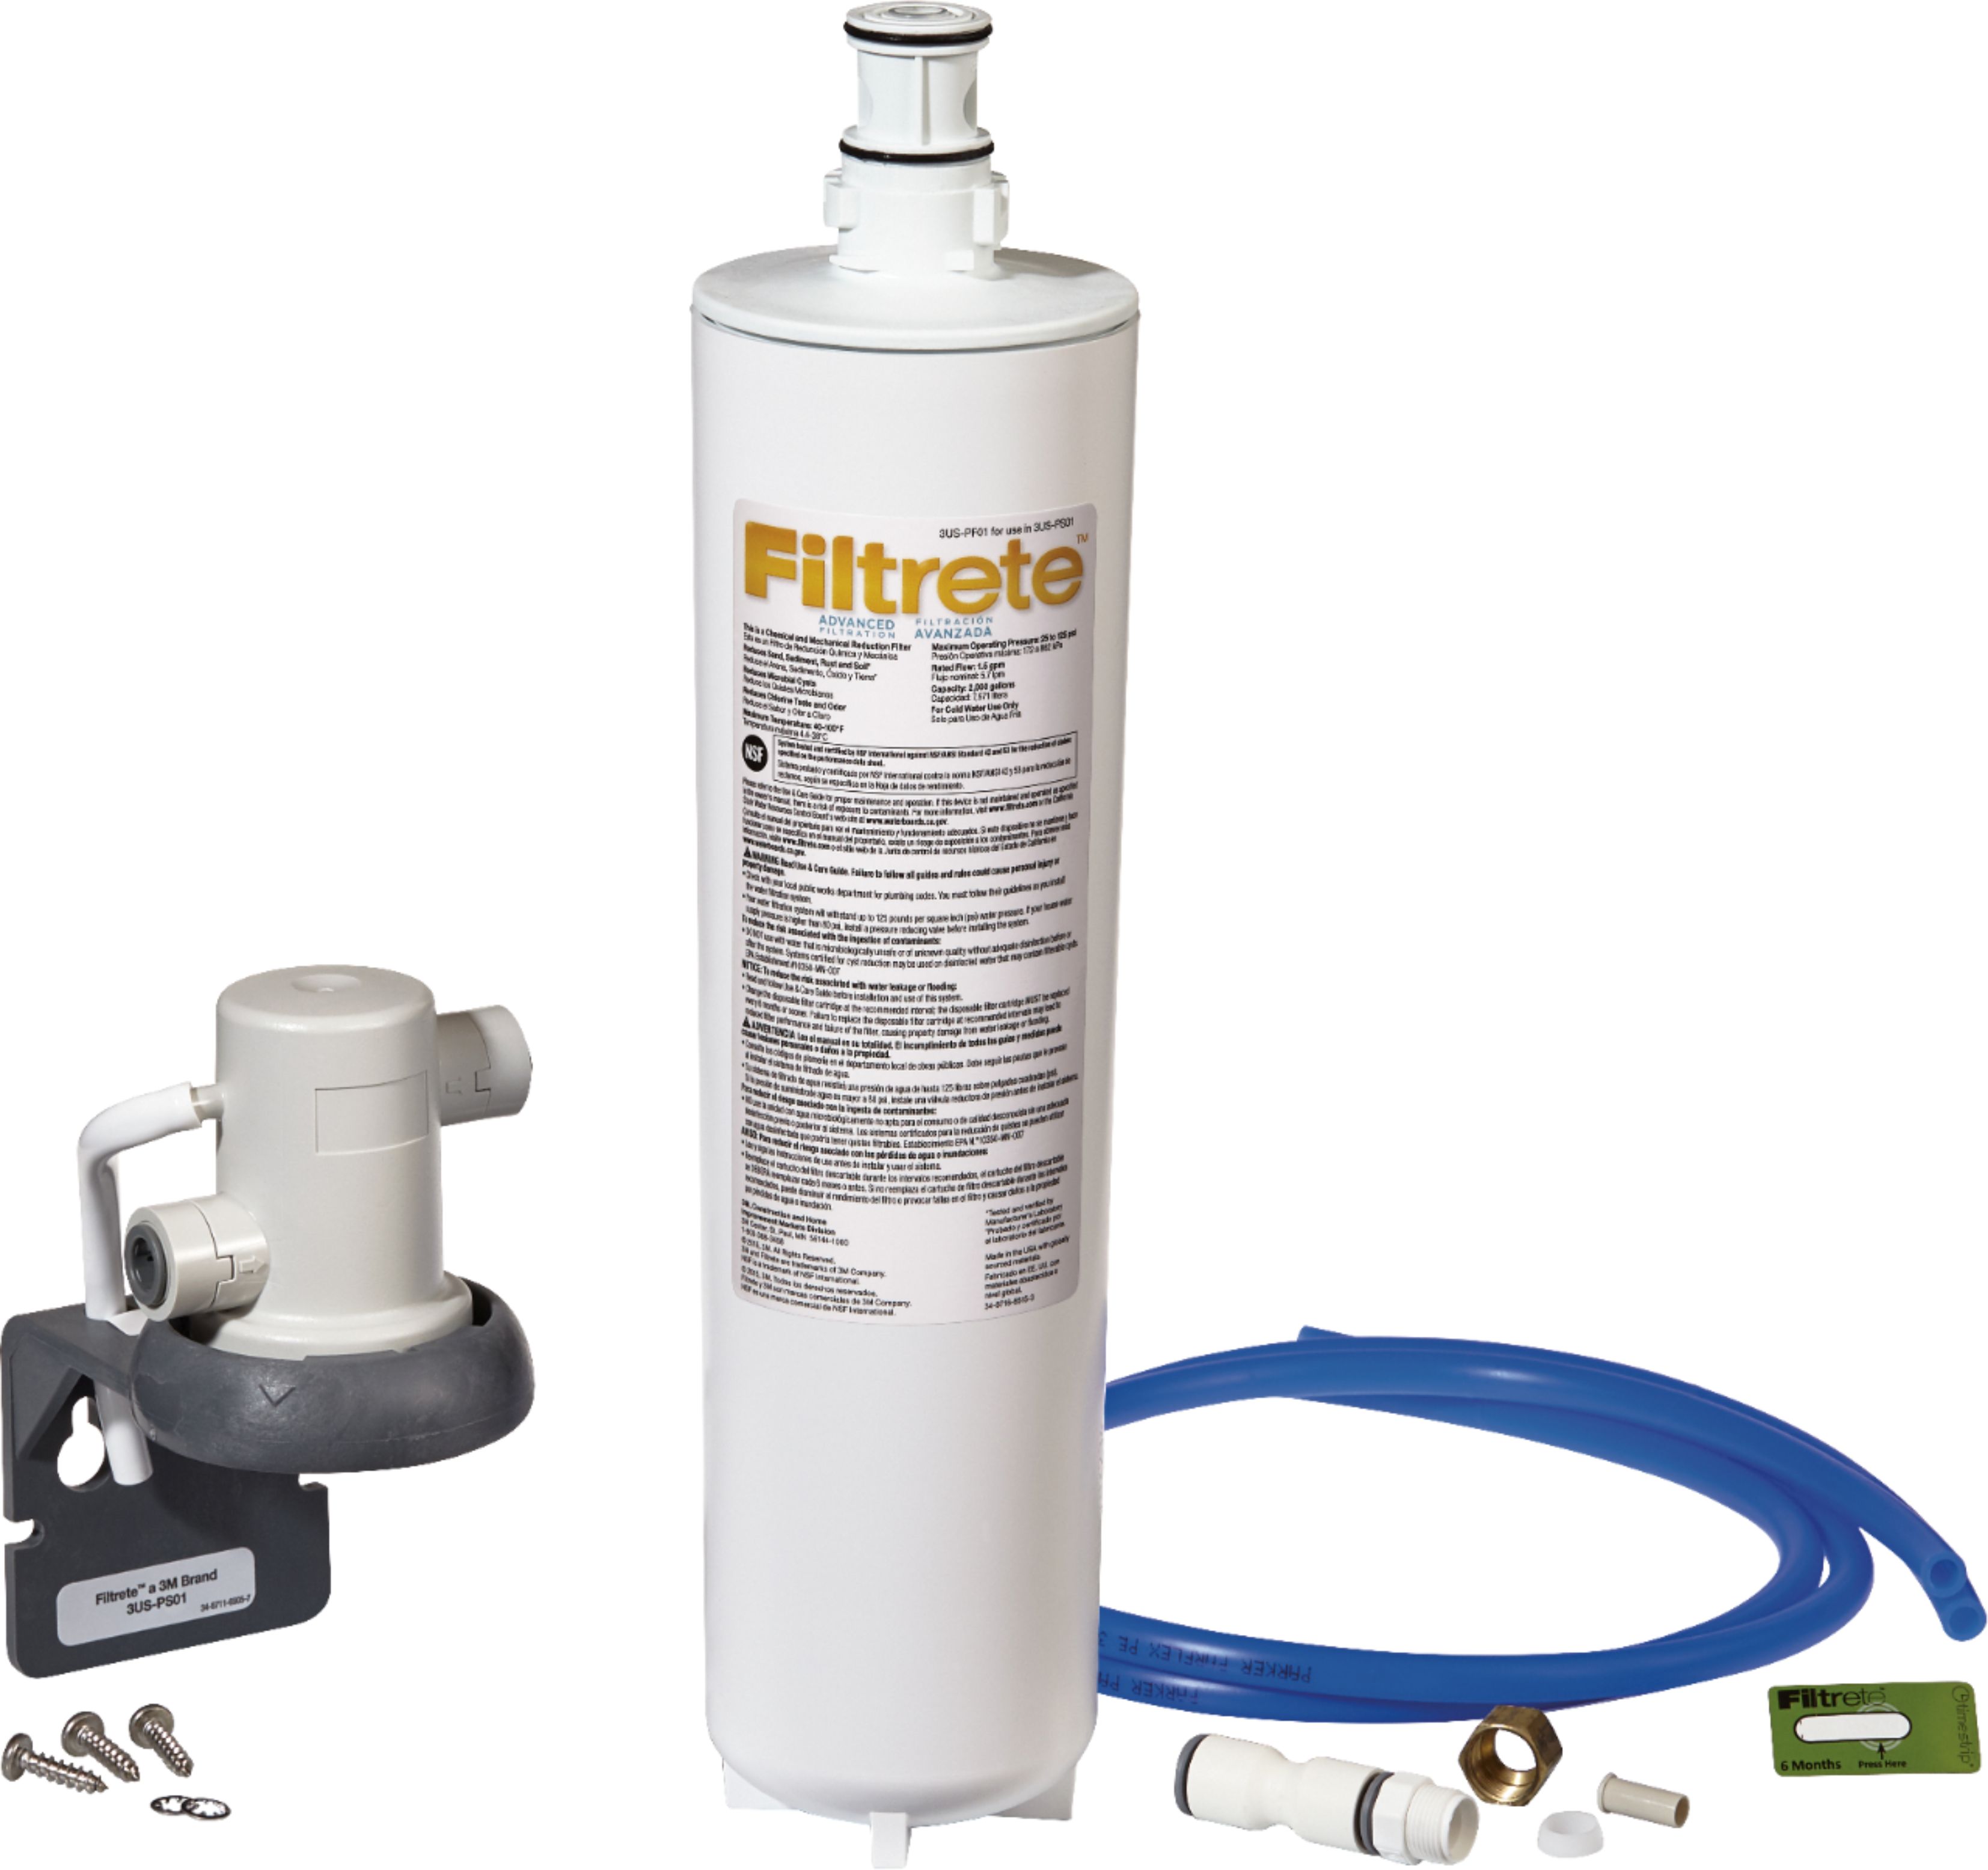 Filtrete - Advanced Under Sink Quick Change Water Filtration System 3US-PS01 - White